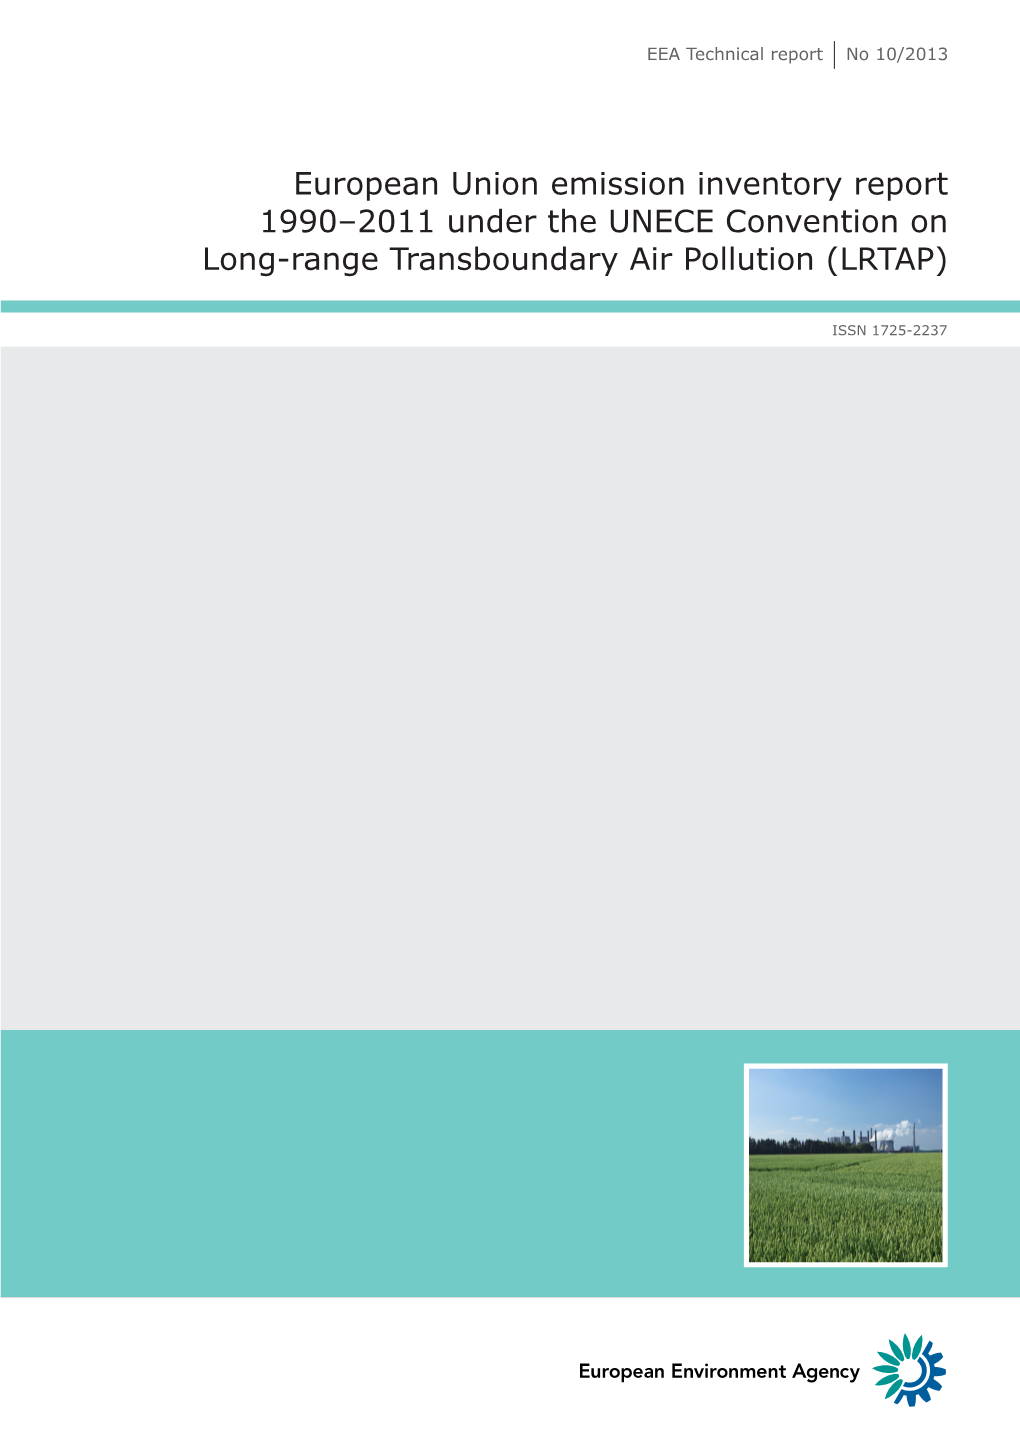 European Union Emission Inventory Report 1990–2011 Under the UNECE Convention on Long-Range Transboundary Air Pollution (LRTAP)